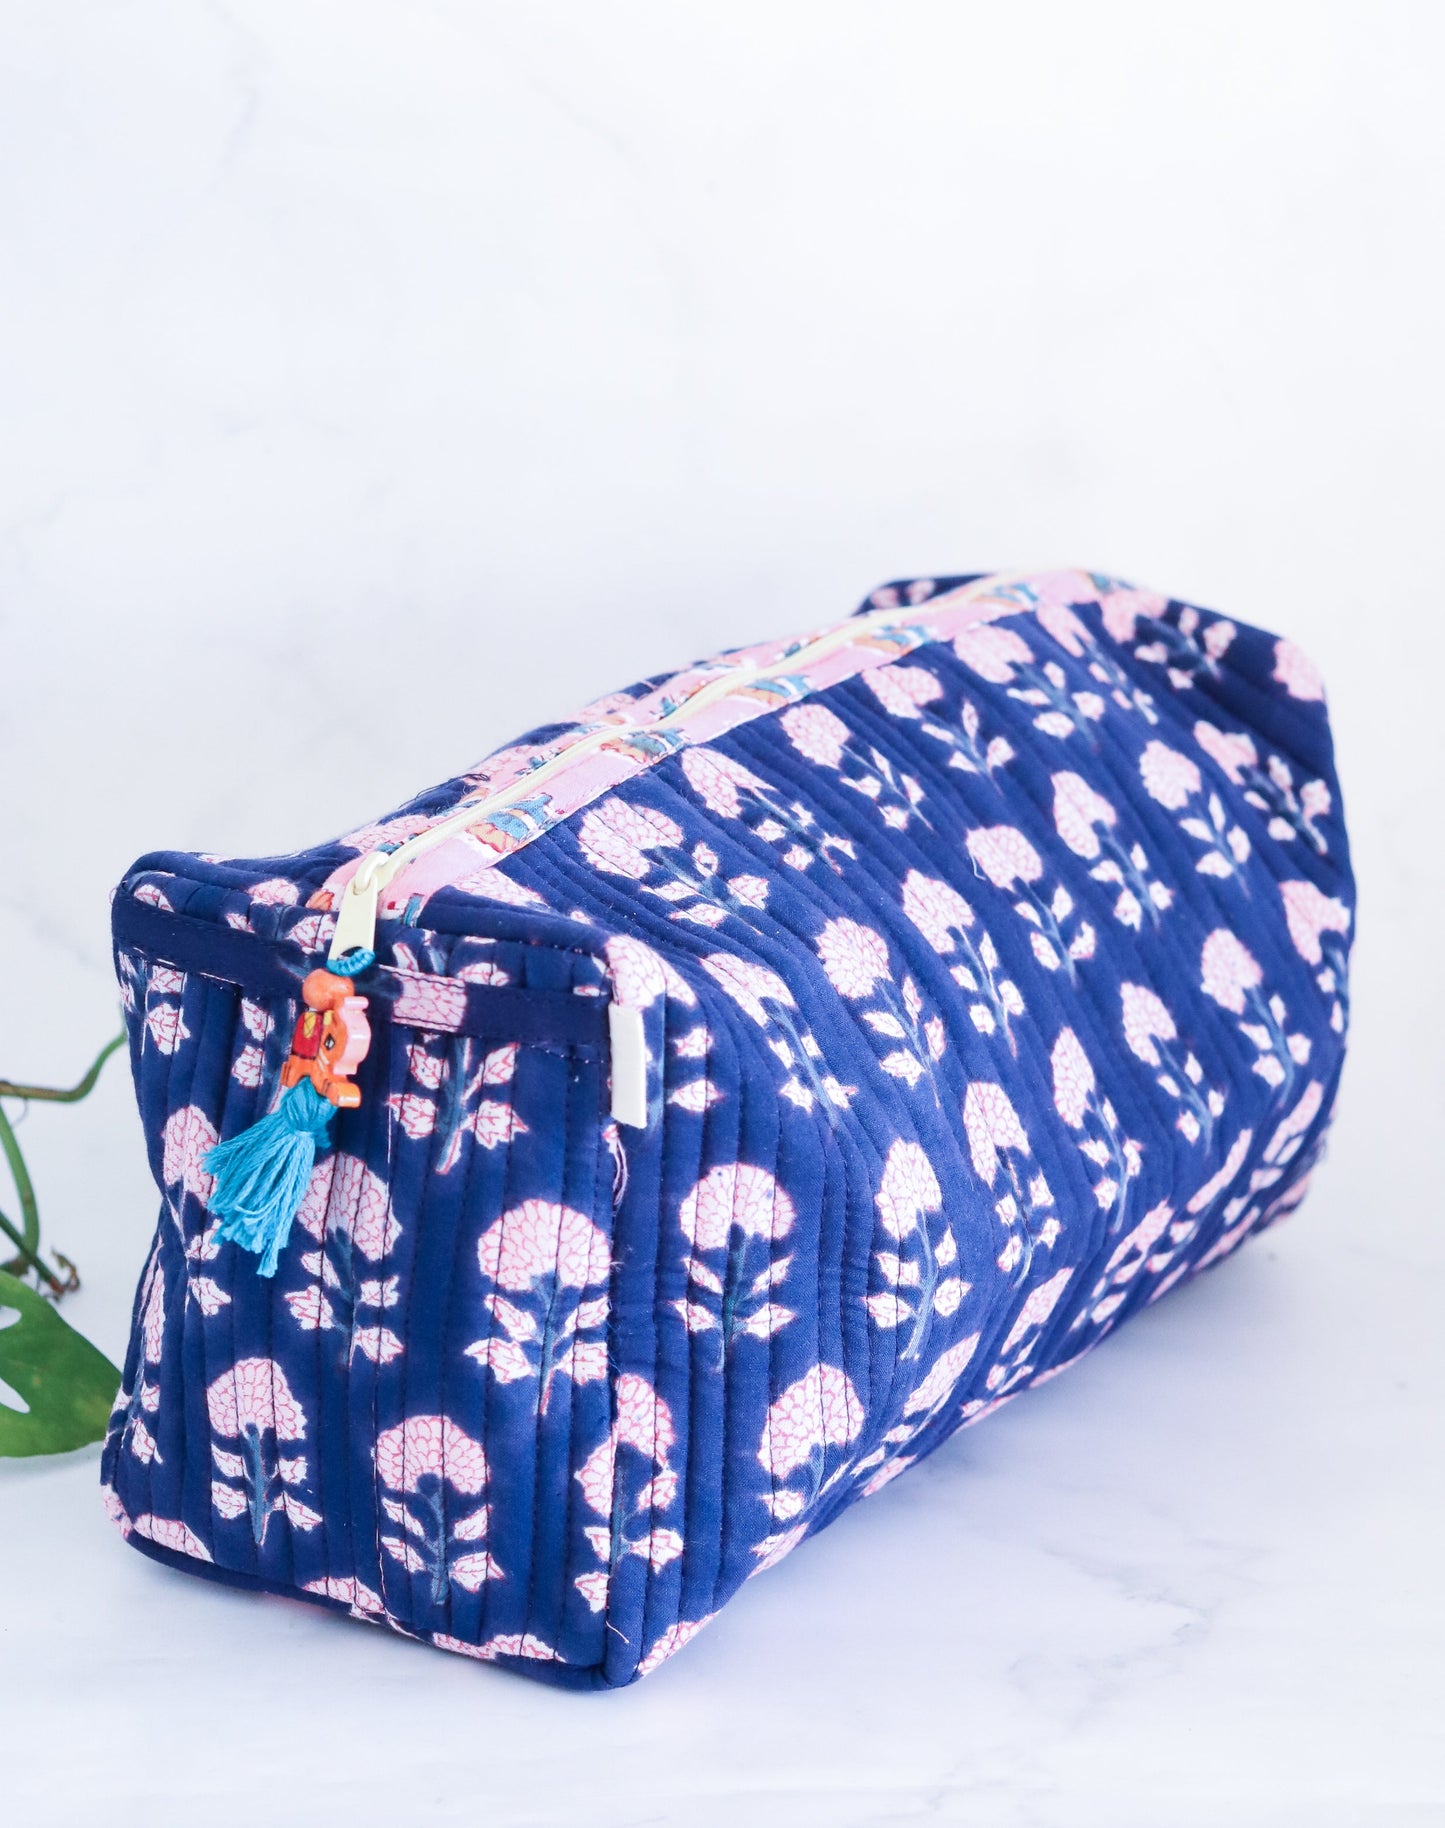 Large Cosmetic bag - Makeup bag - Block print fabric travel pouch- Dark blue cosmetic pouch